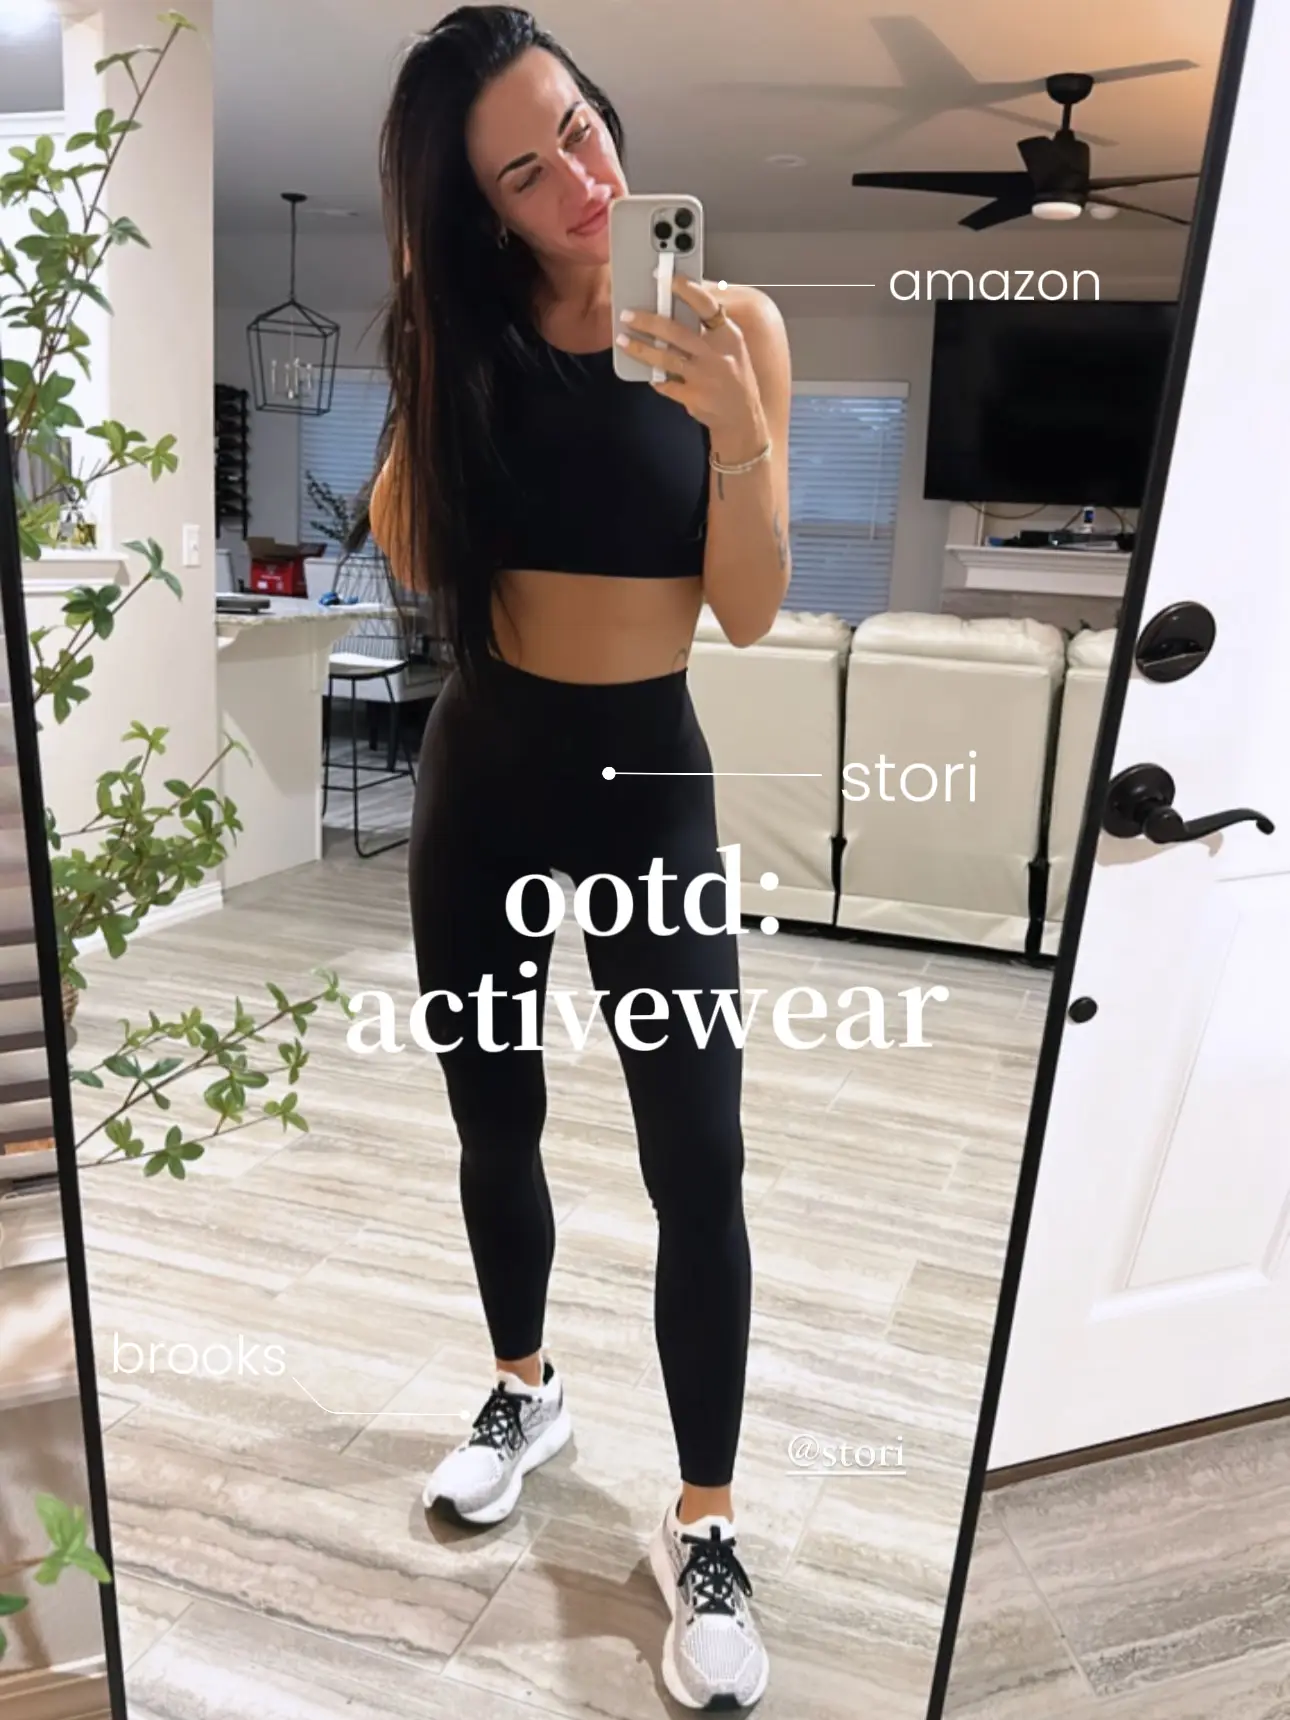 Ribbed Halter Crop Top and Workout Leggings Women Activewear Sets – Zioccie